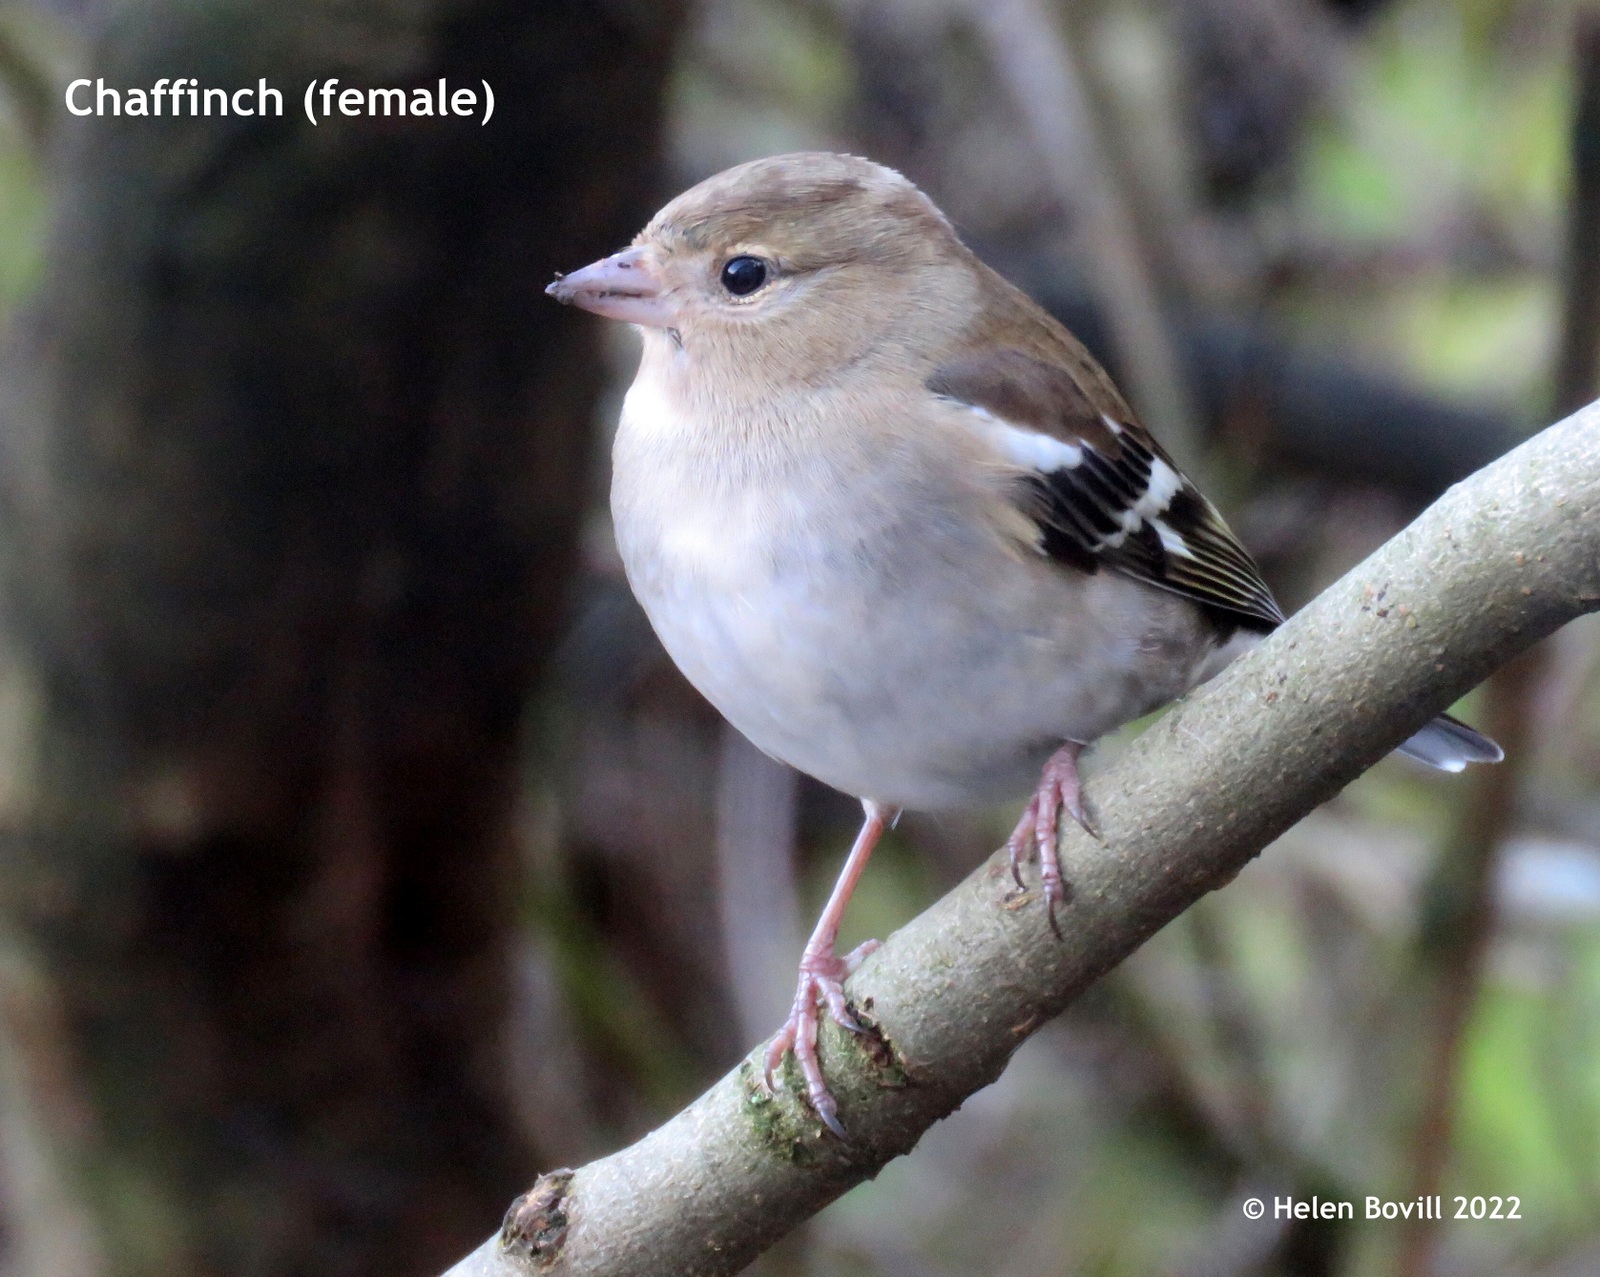 Chaffinch in the cemetery